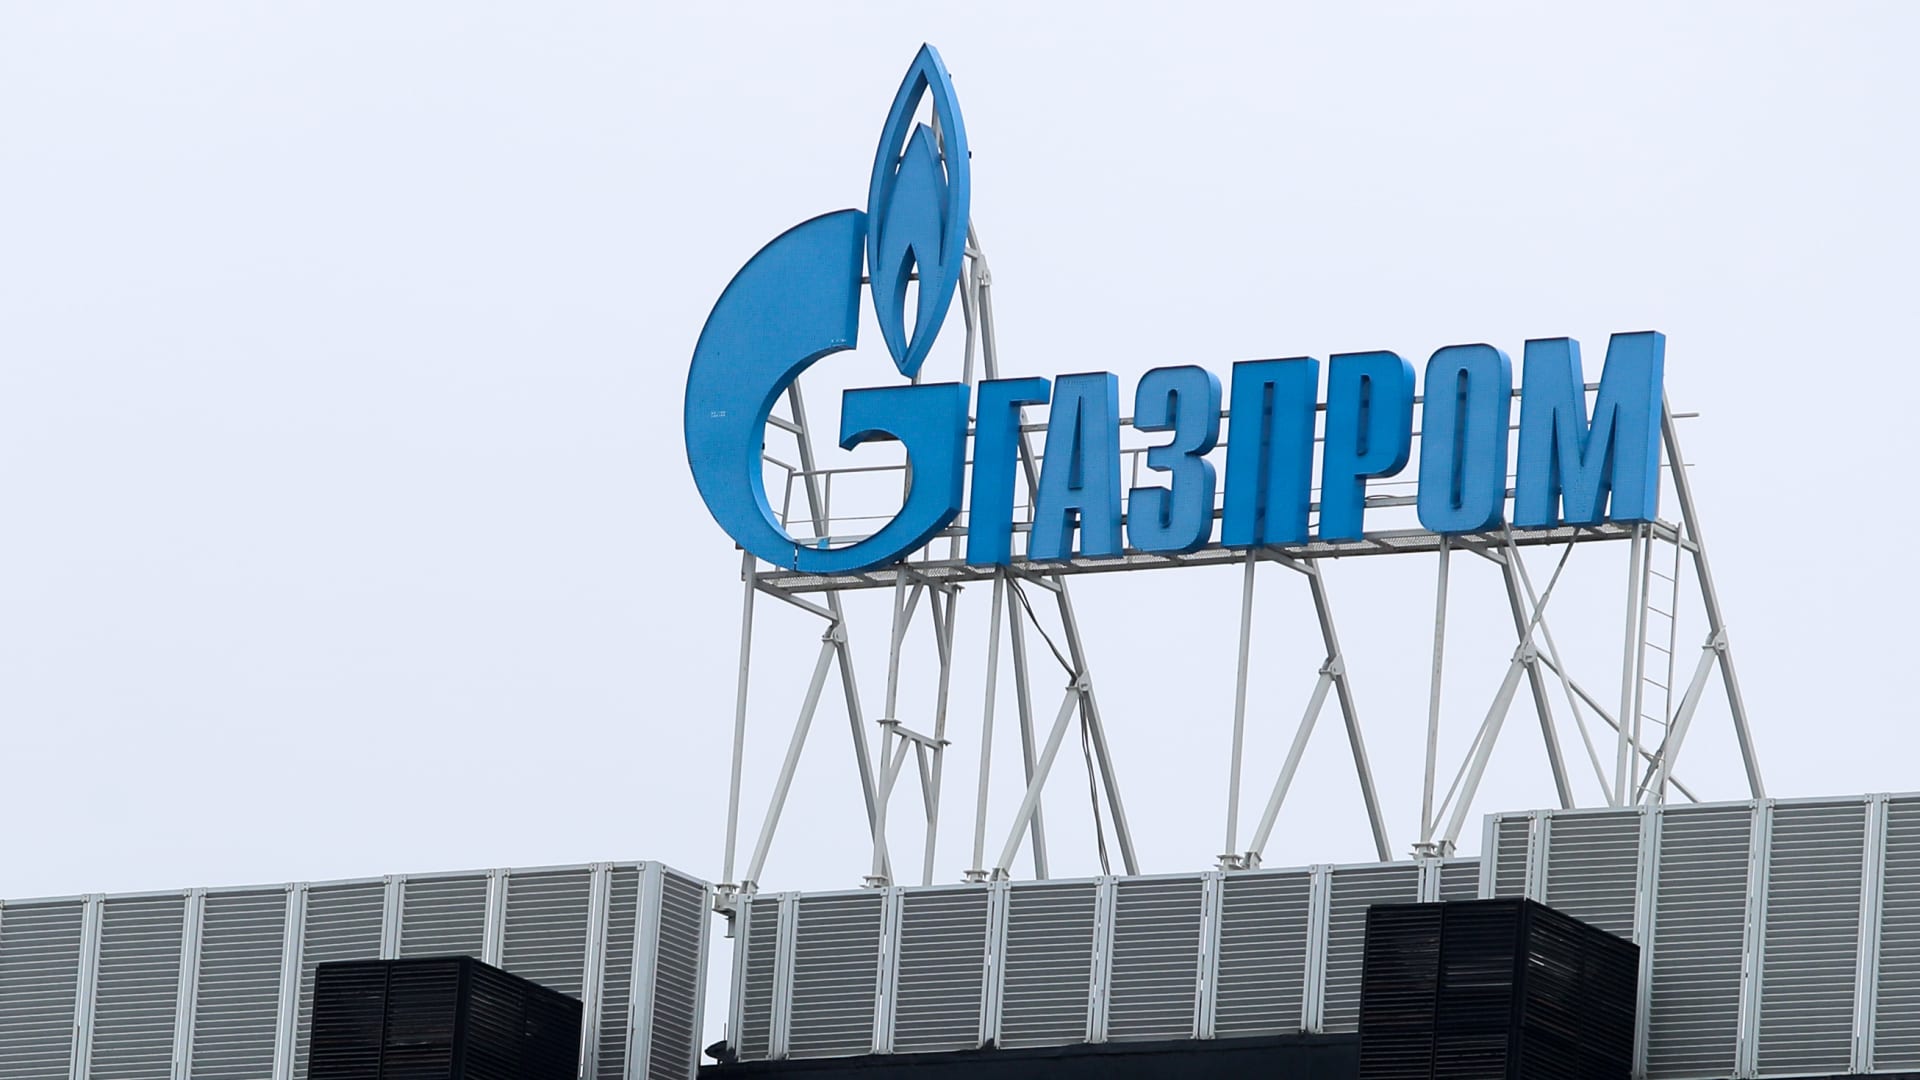 Gazprom reported record earnings in 2021 thanks to soaring commodity prices.